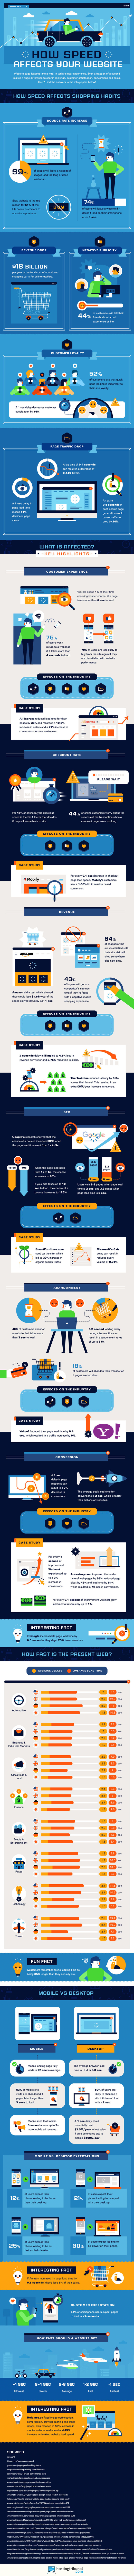 How speed affects your website - infographic by Hosting Tribunal